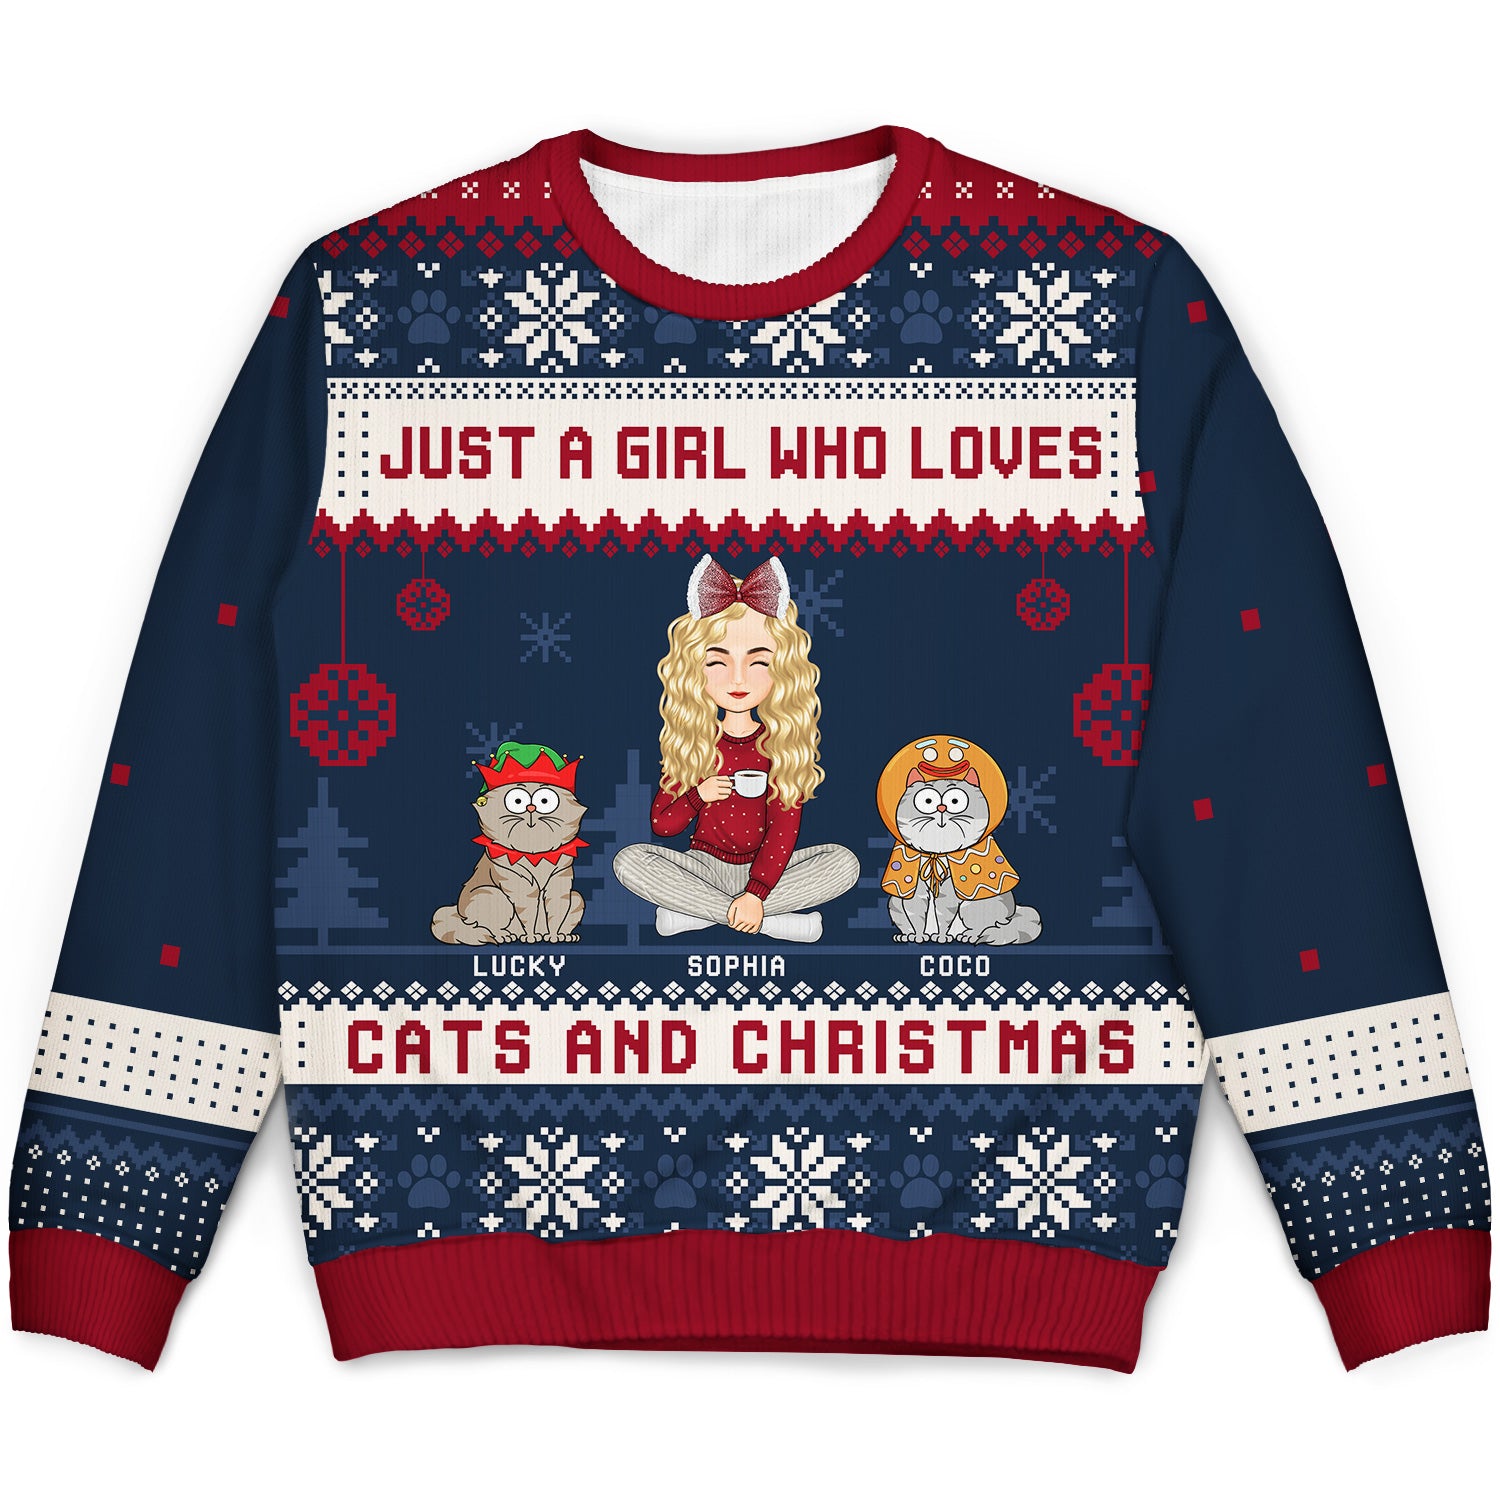 Just A Girl Who Loves Cats And Christmas Cartoon Style - Gift For Cat Moms, Cat Lovers - Personalized Unisex Ugly Sweater